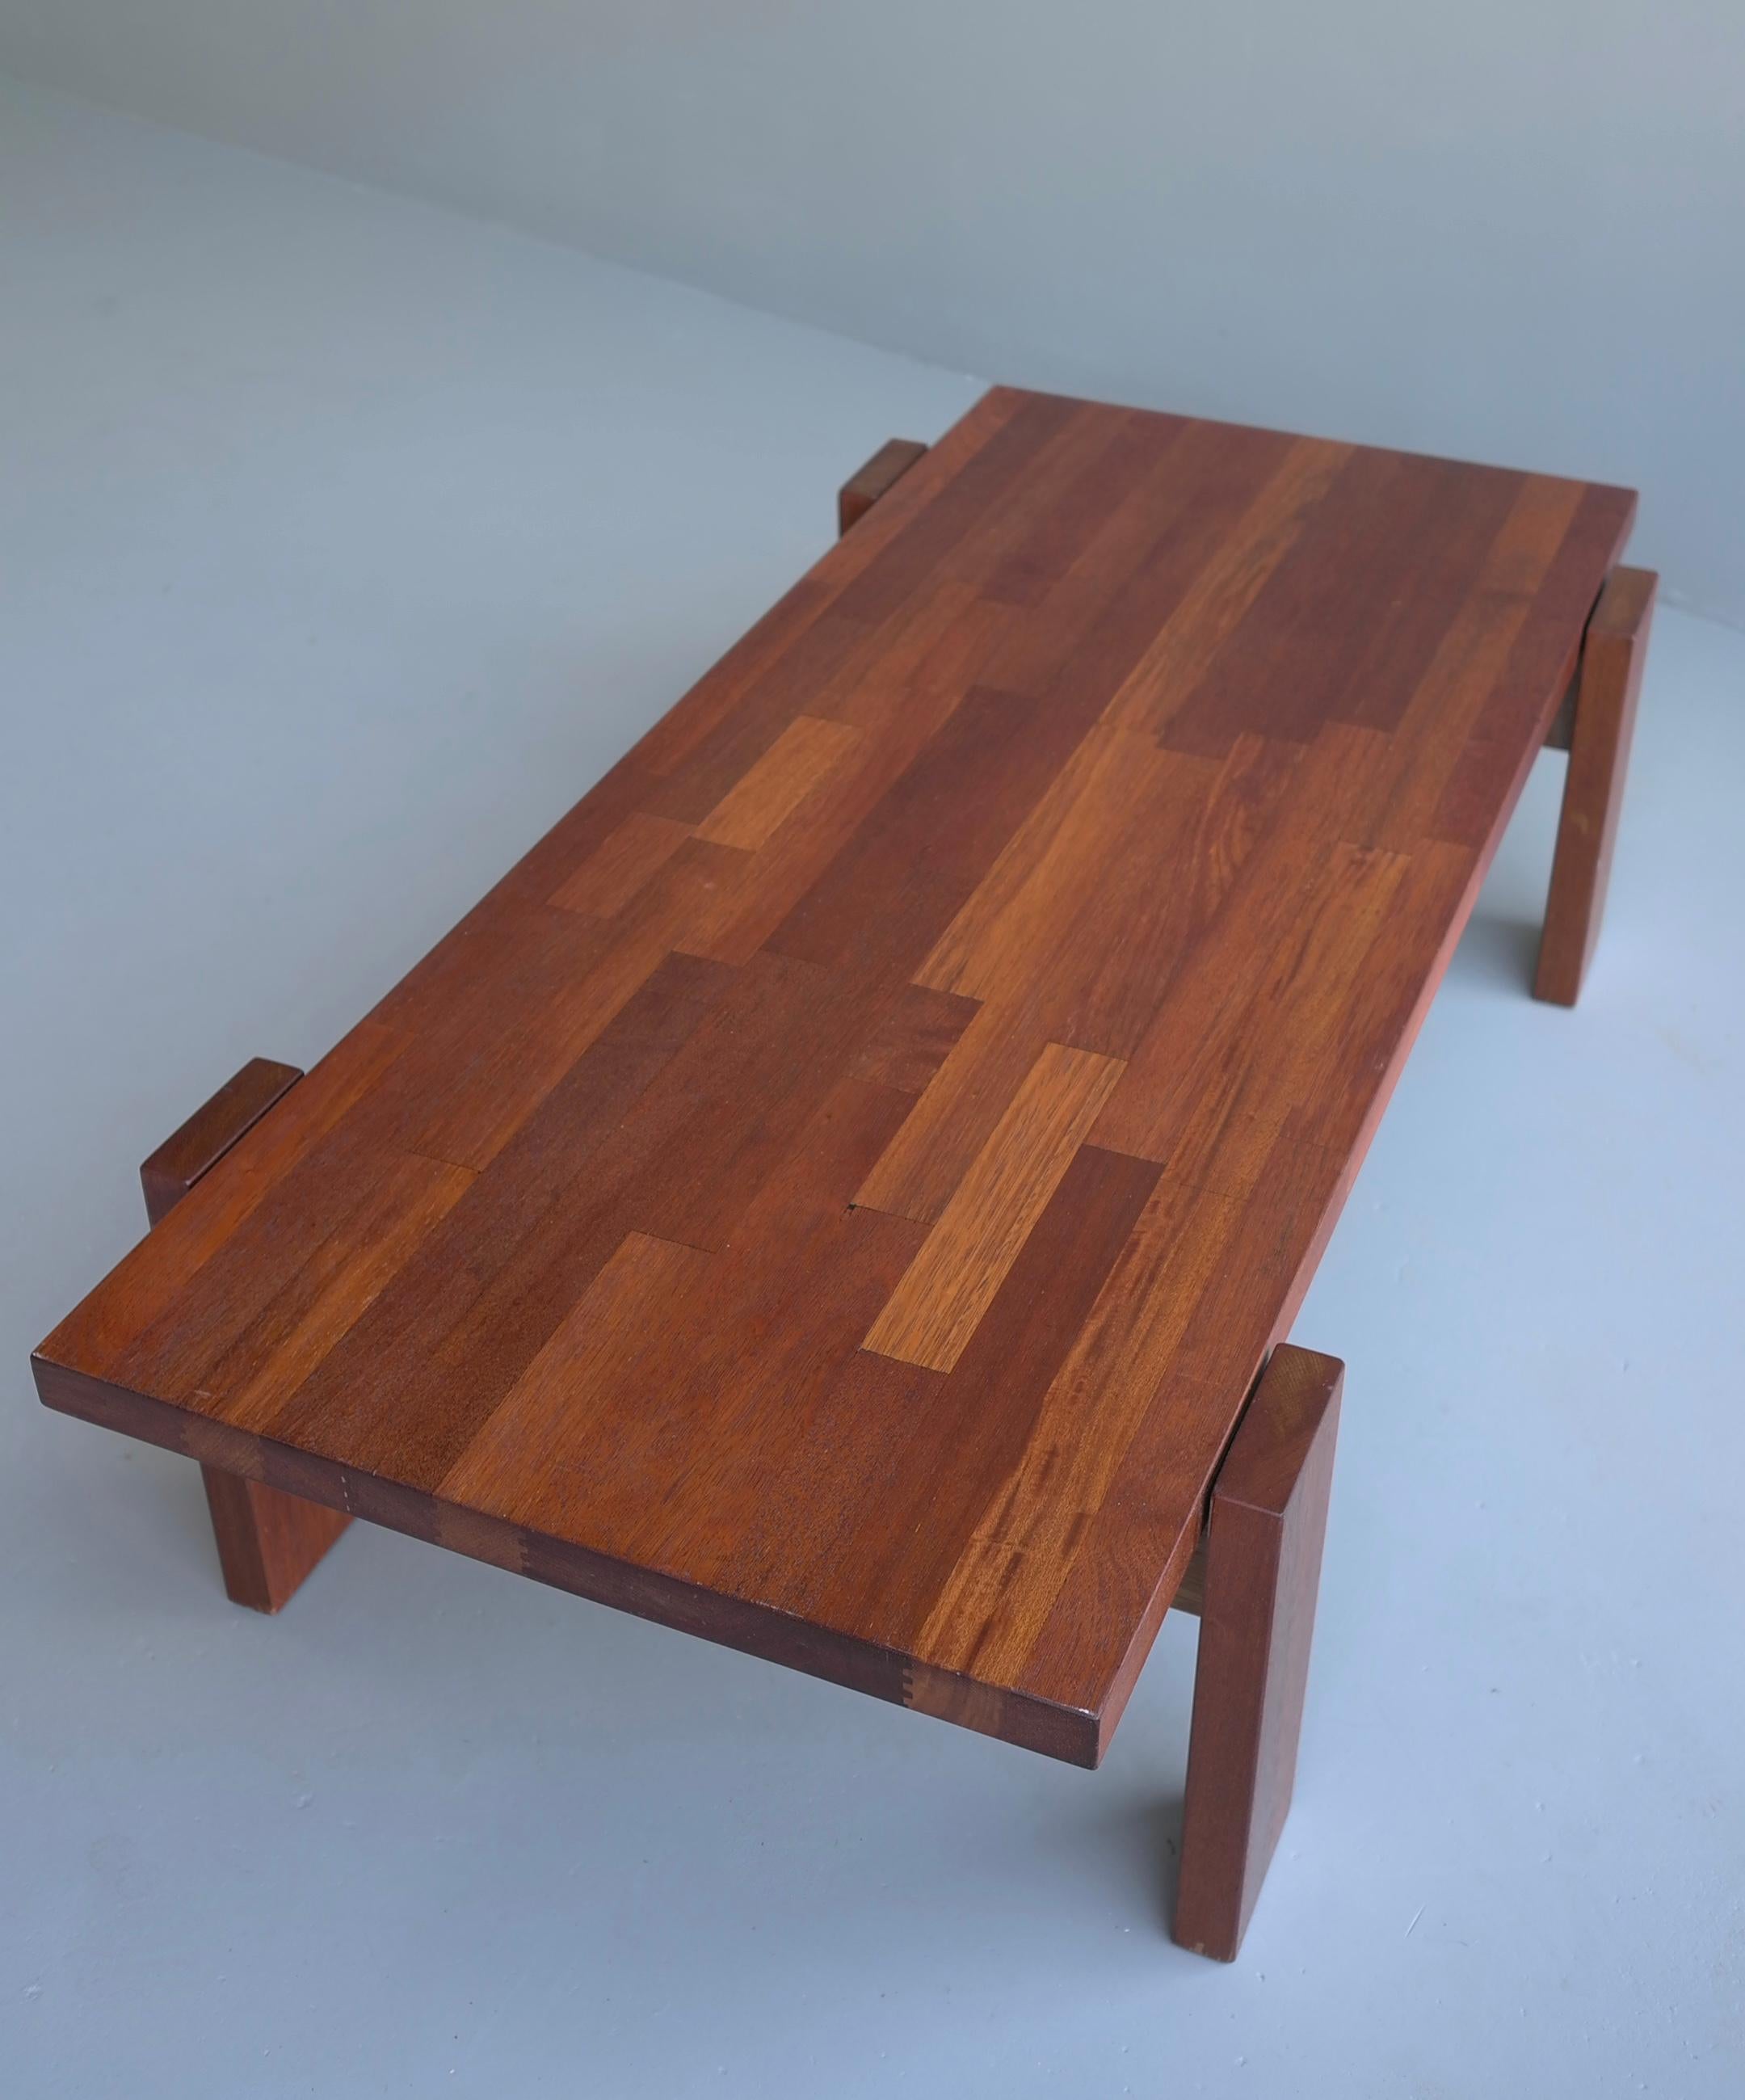 Robust Hardwood Coffee Table in Style of Jorge Zalszupin, Brazil, 1960s For Sale 5